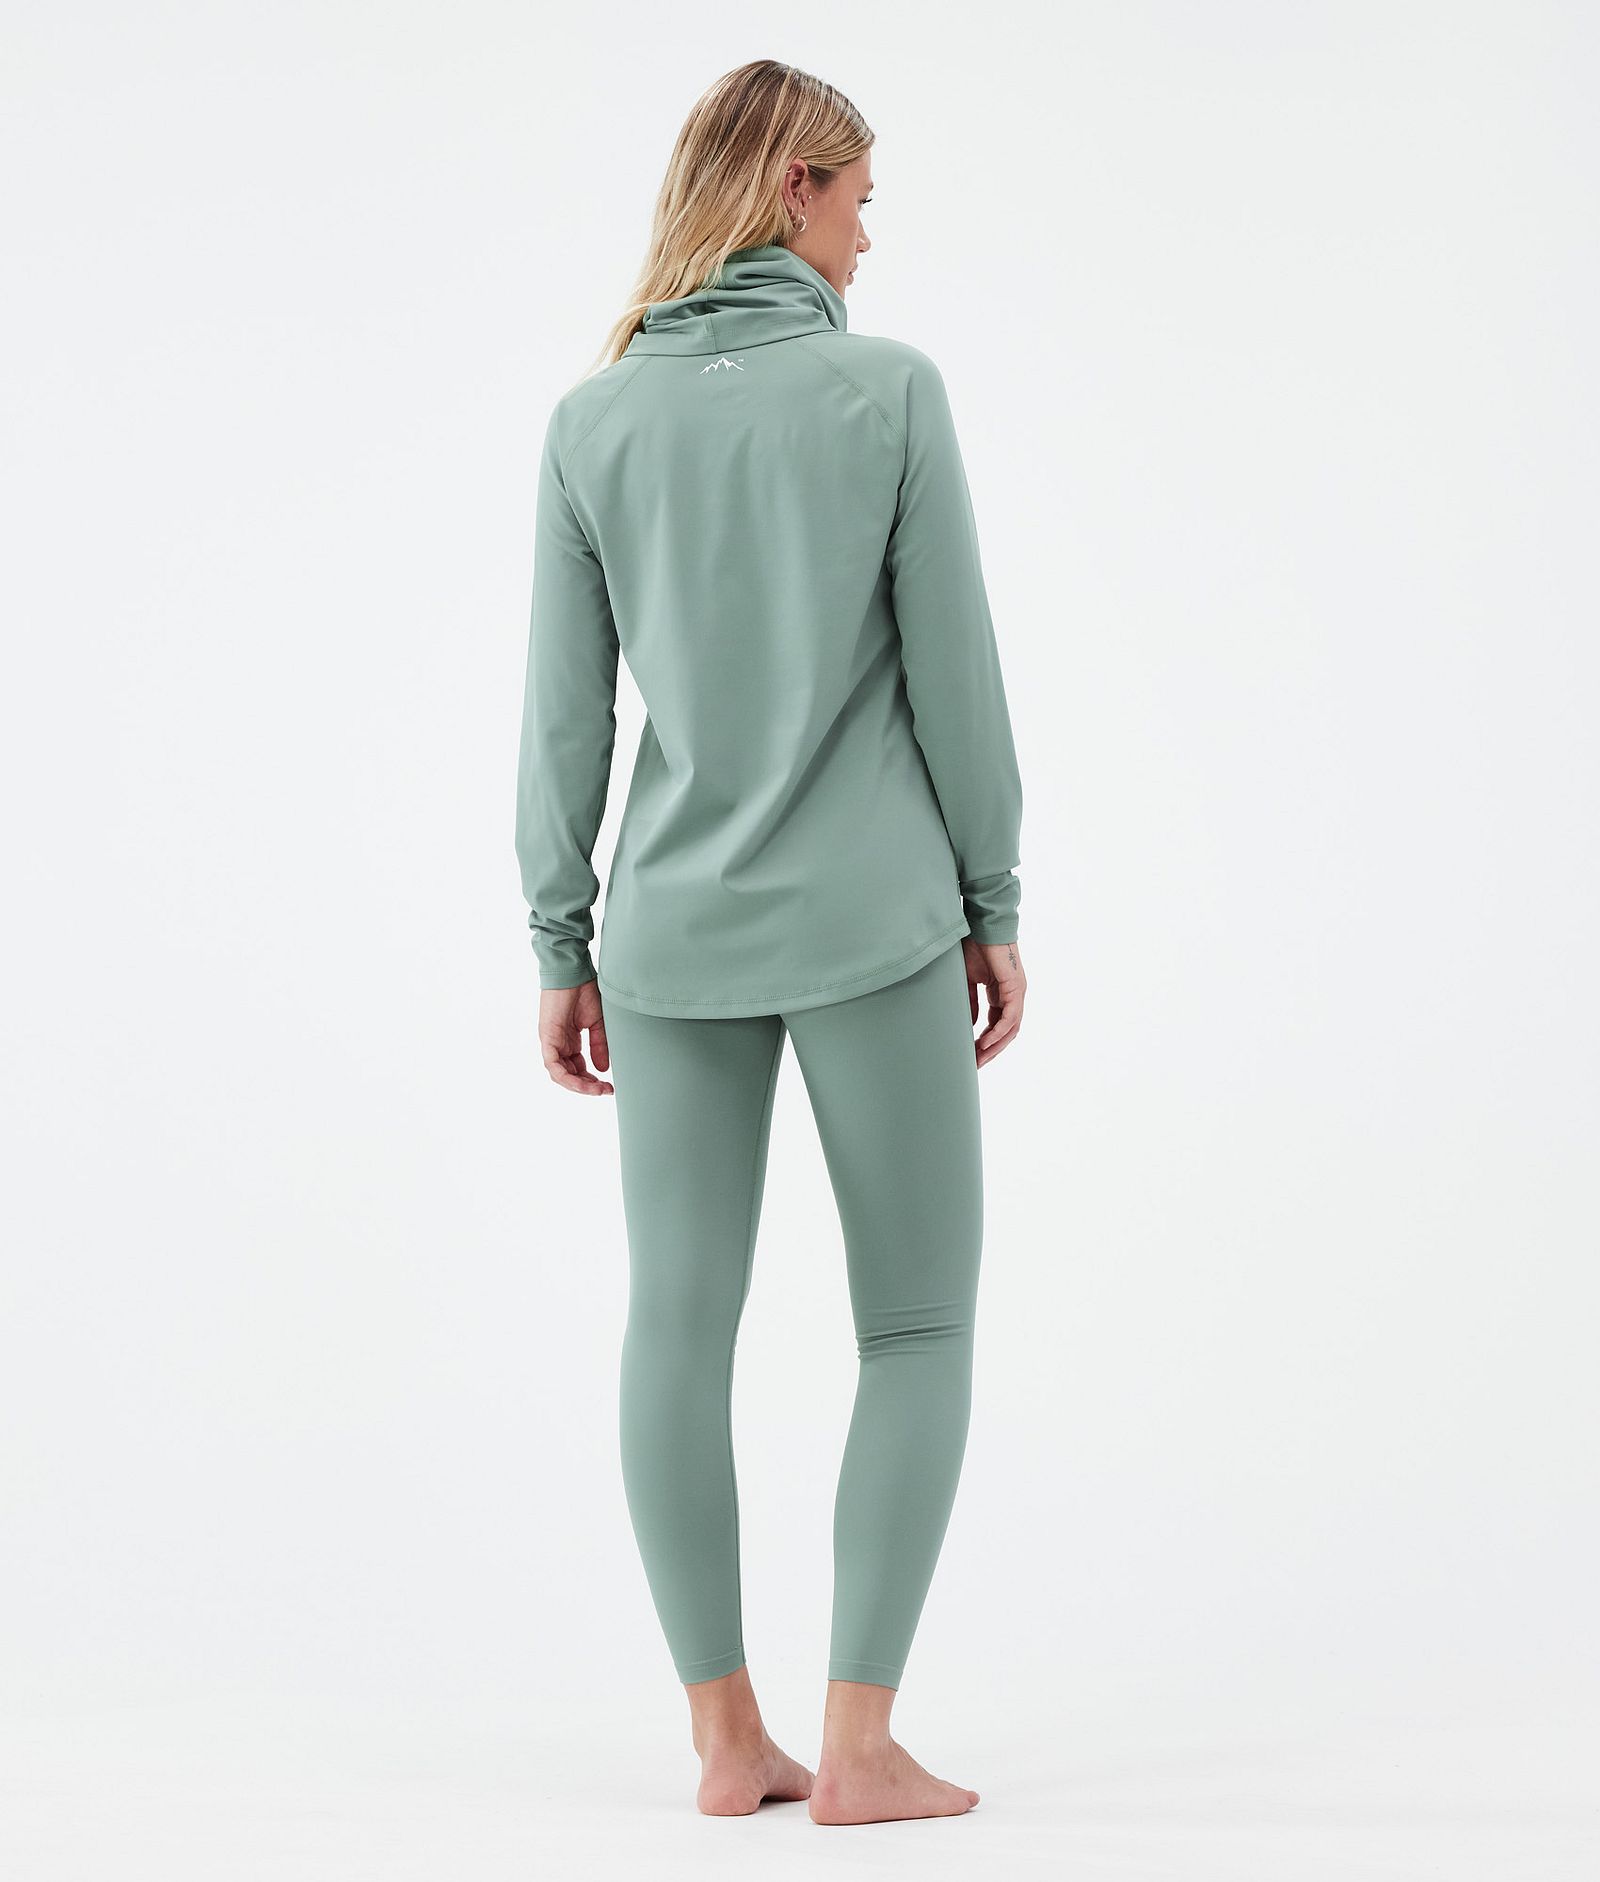 Snuggle W Tee-shirt thermique Femme 2X-Up Faded Green